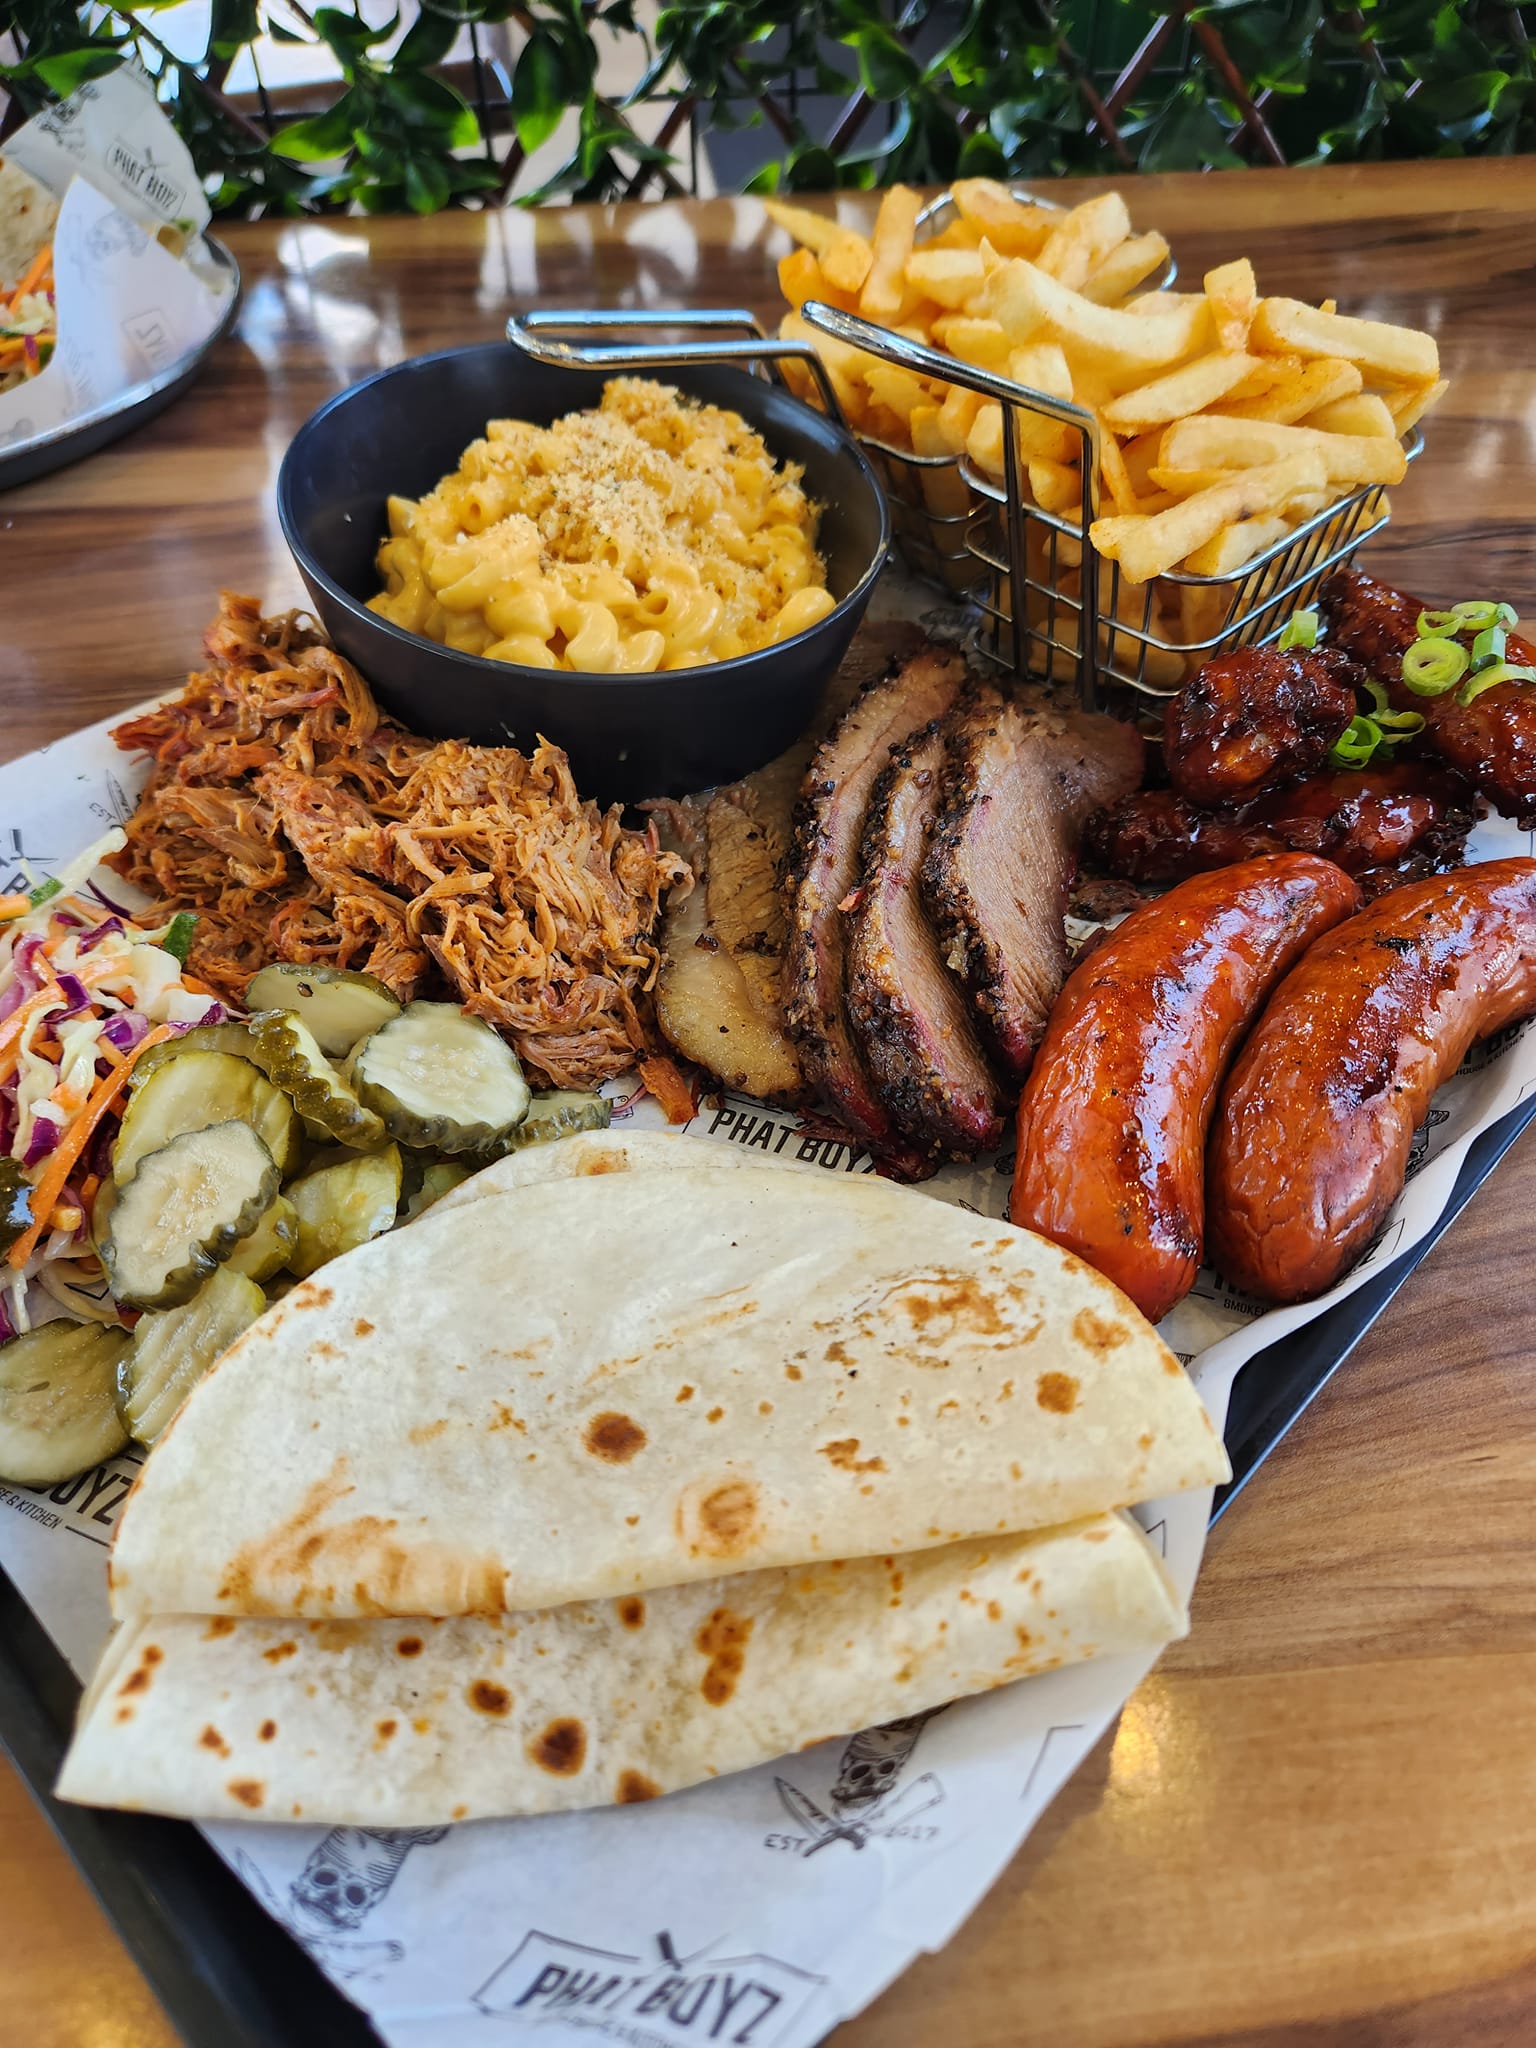 a large platter of bbq meats and side